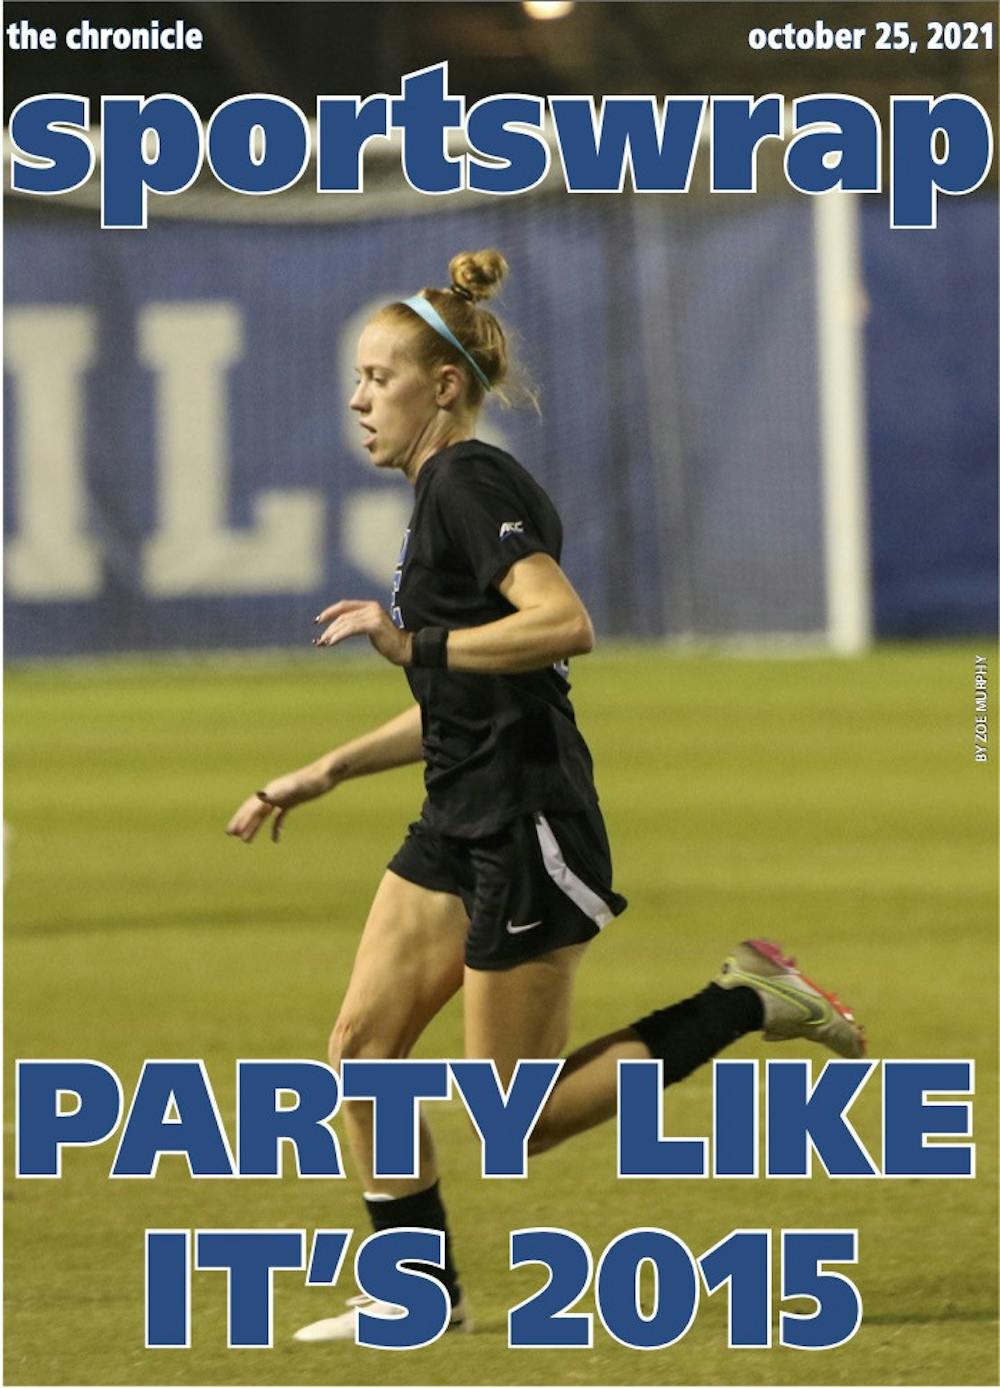 Senior Tess Boade knocked in the lone goal for the Blue Devils to beat Florida State.